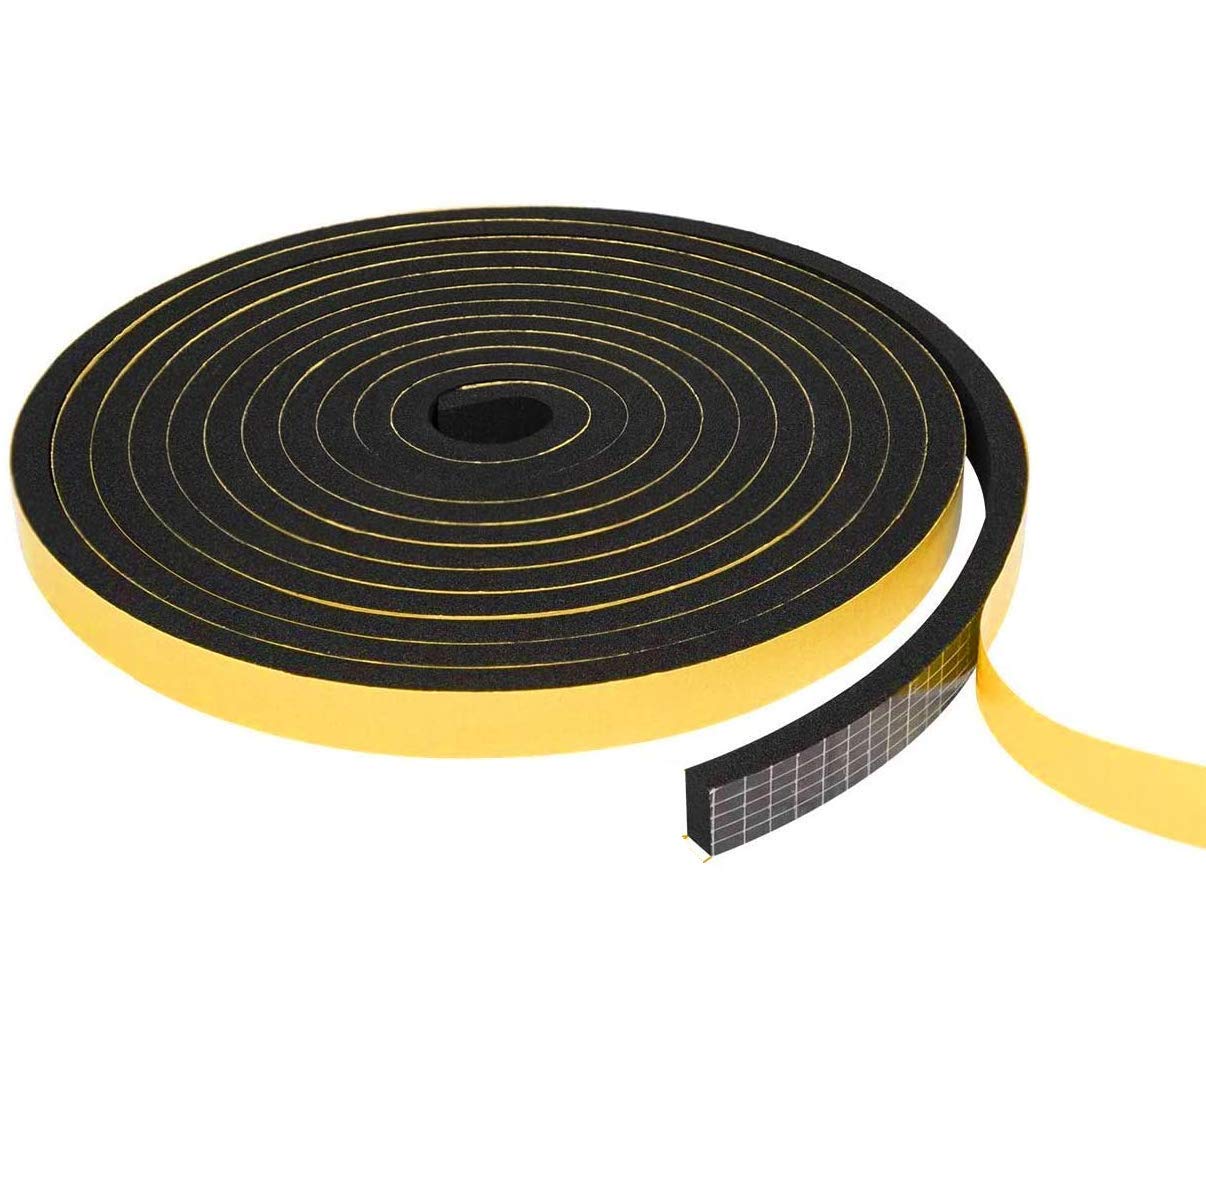 Hukimoyo Waterproof Self-Adhesive thick Seal, Weather Stripping Single sided foam tape, Soundproofing Gasket tape - 1 Roll (2m x 15mm x 5mm)